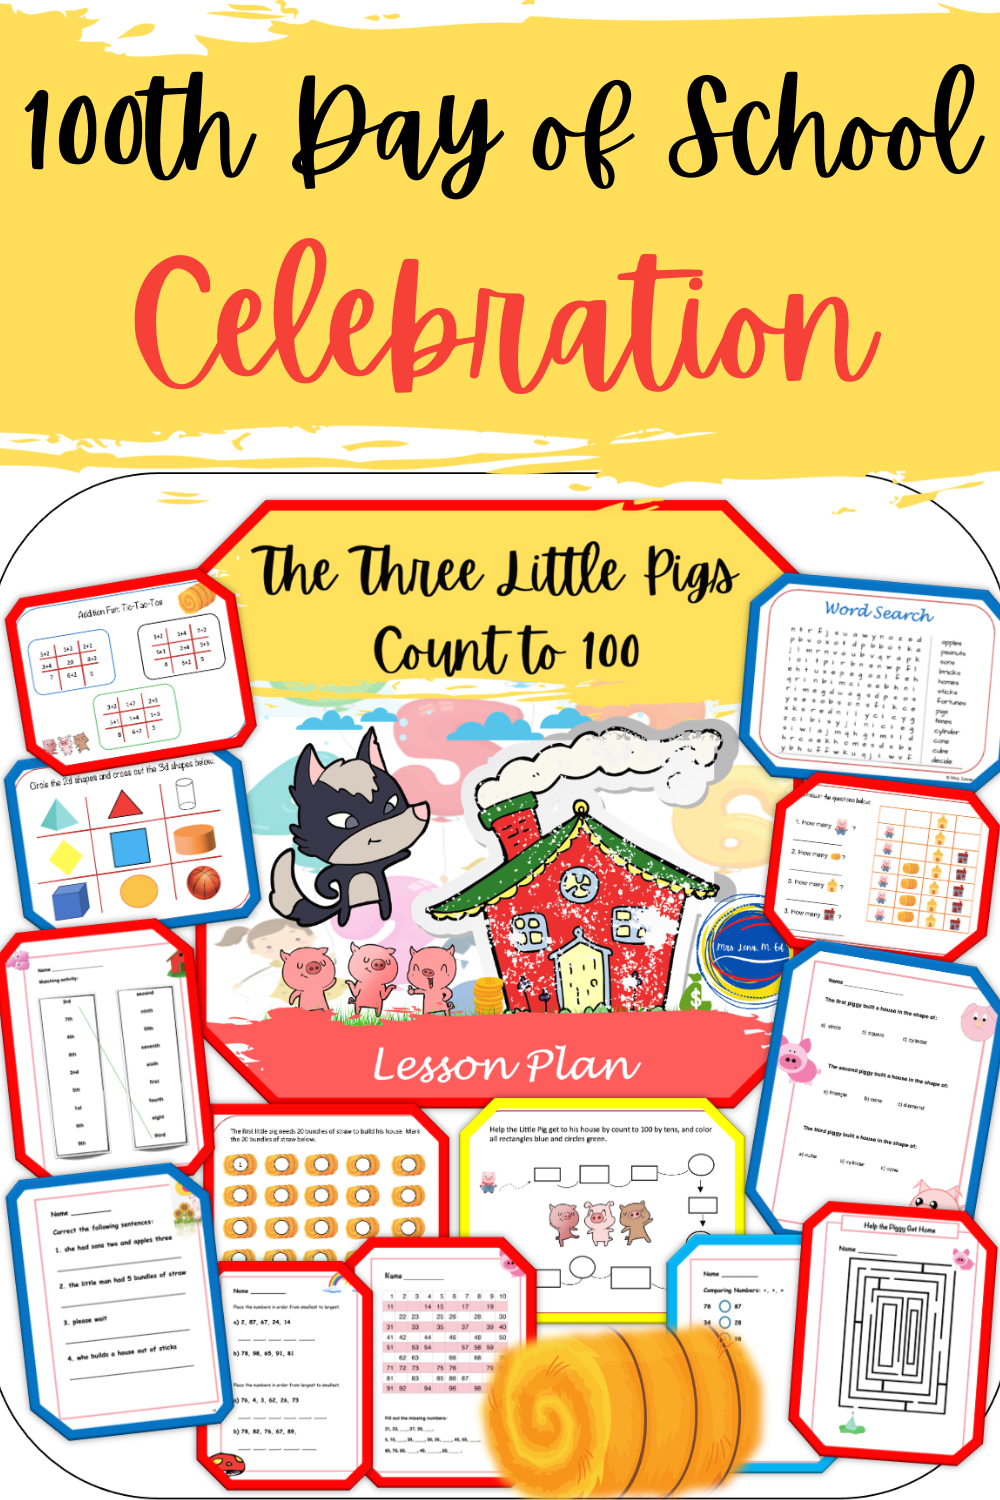 The Three Little Pigs Count to 100 Hundred Days of School Lesson Plan and Activities 